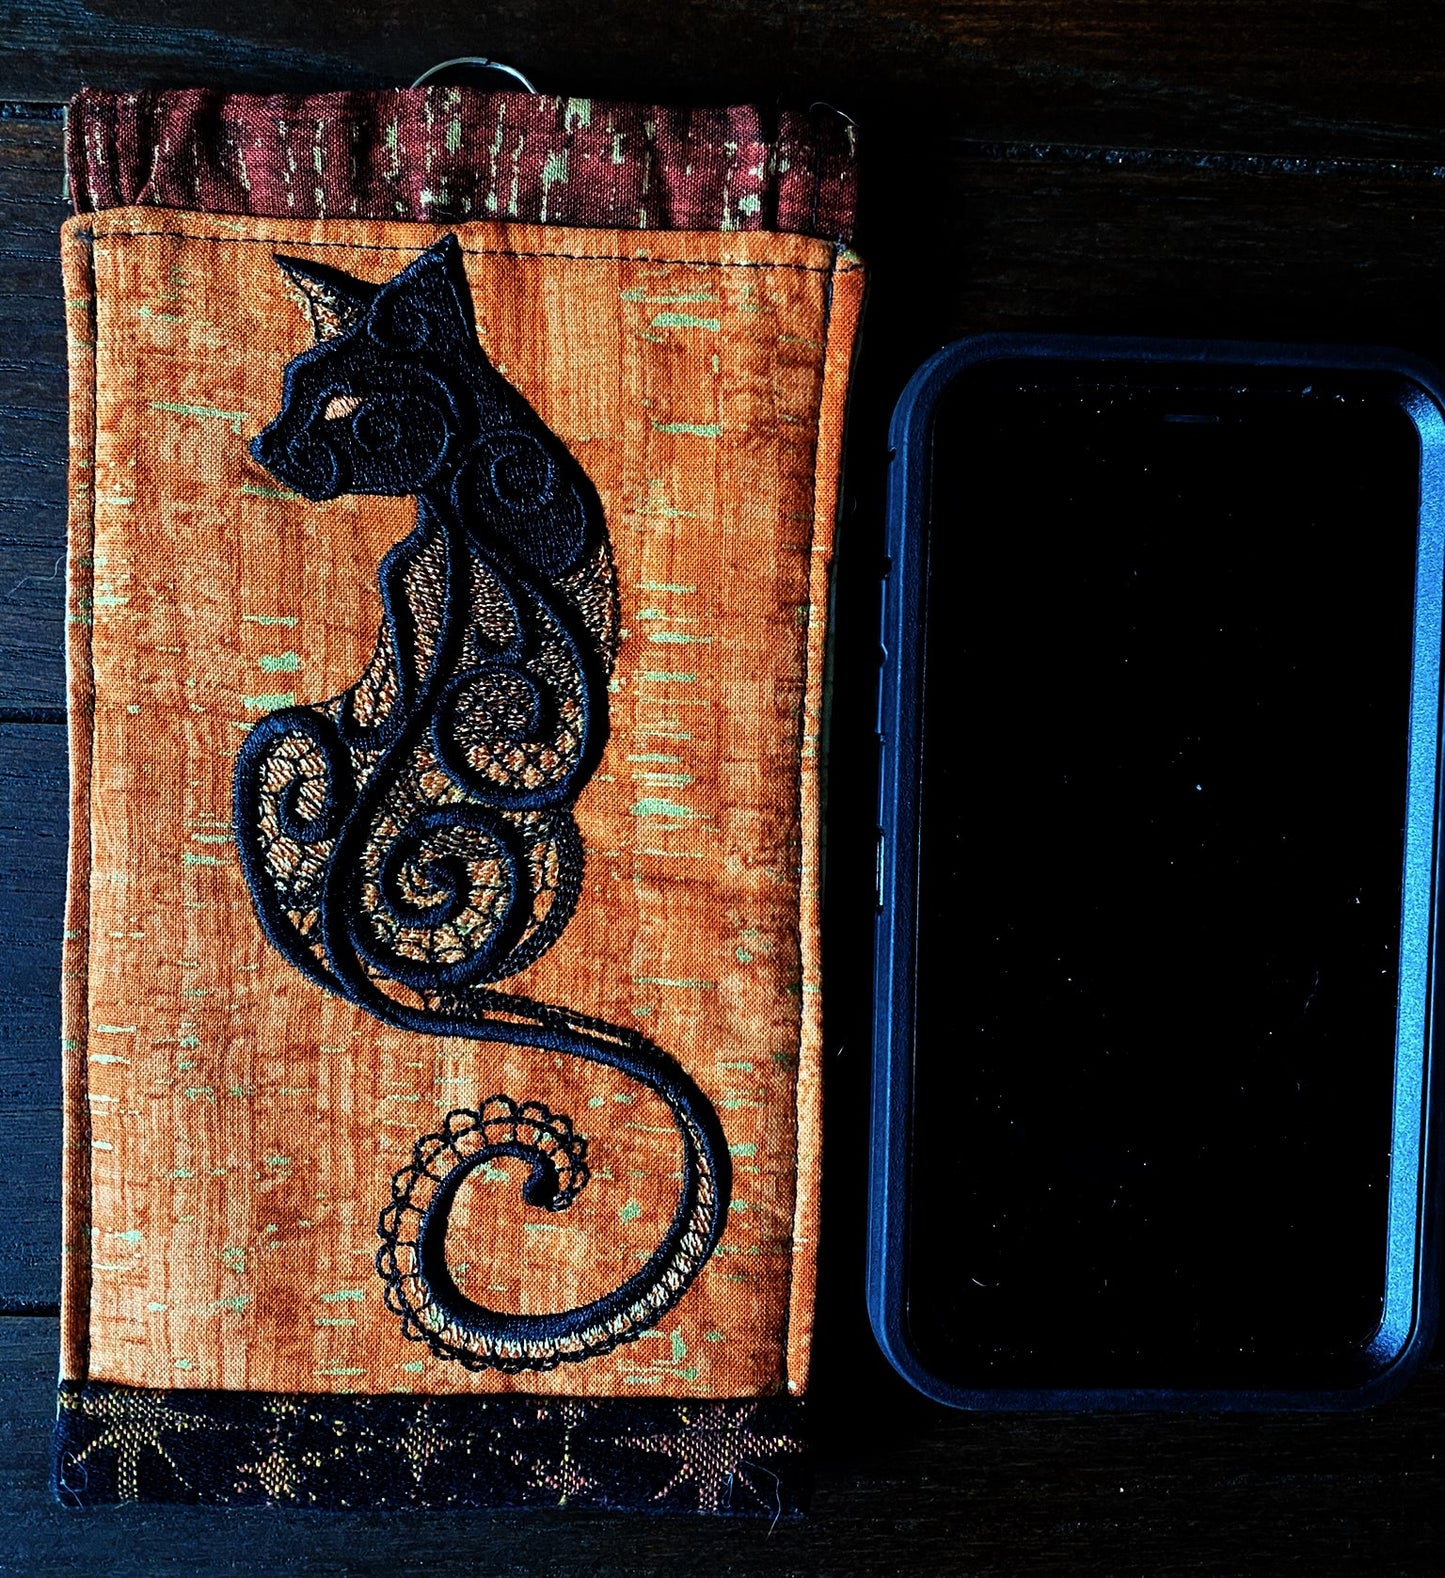 Her Familiars Phone Pouch with Internal Card Pocket